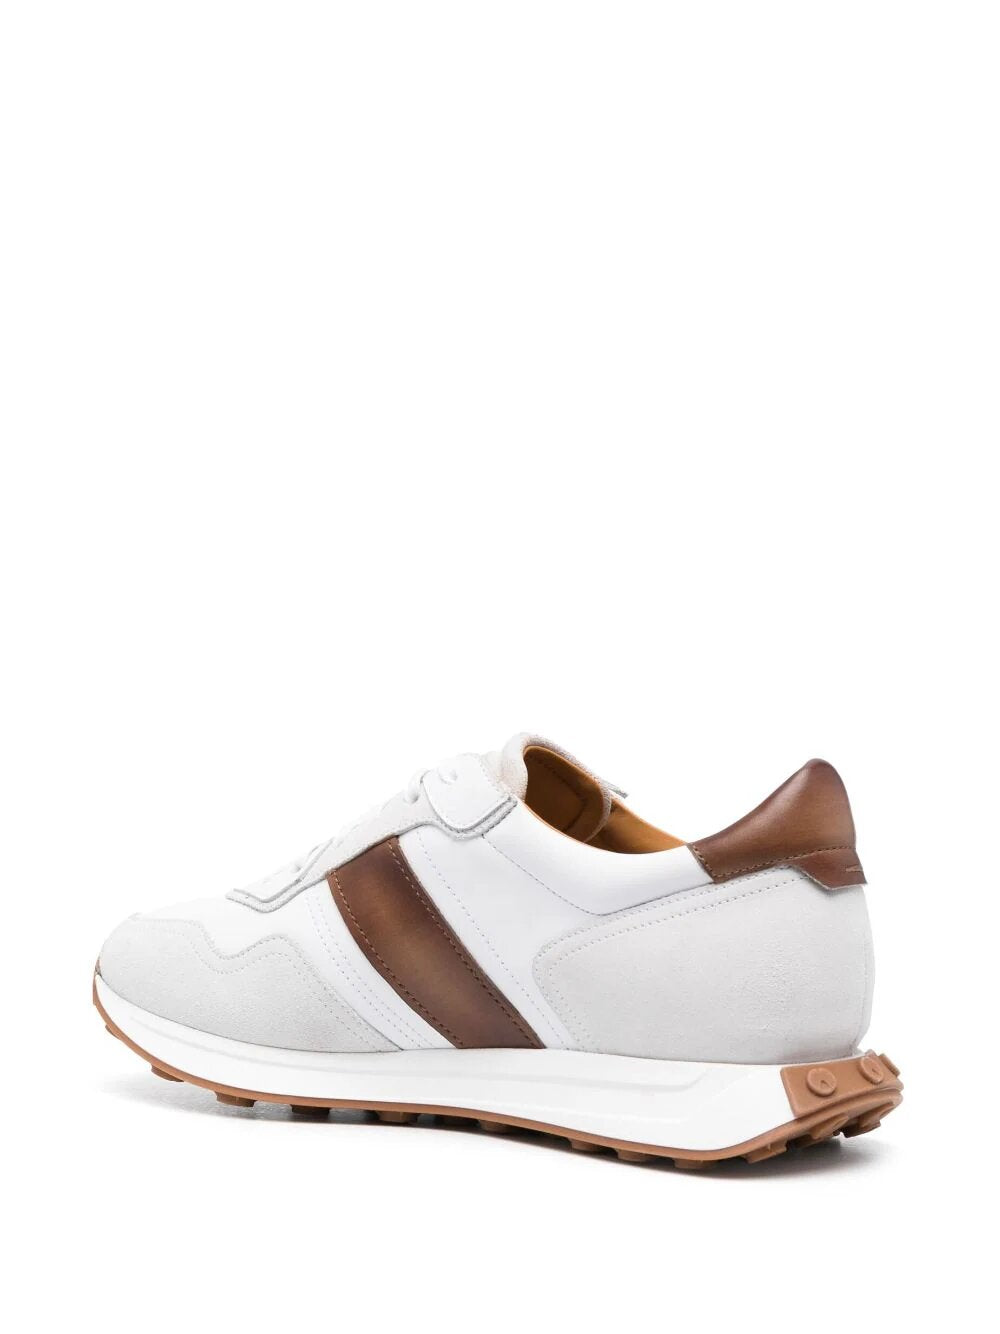 MAGNANNI PANELLED FLAT TRAINERS